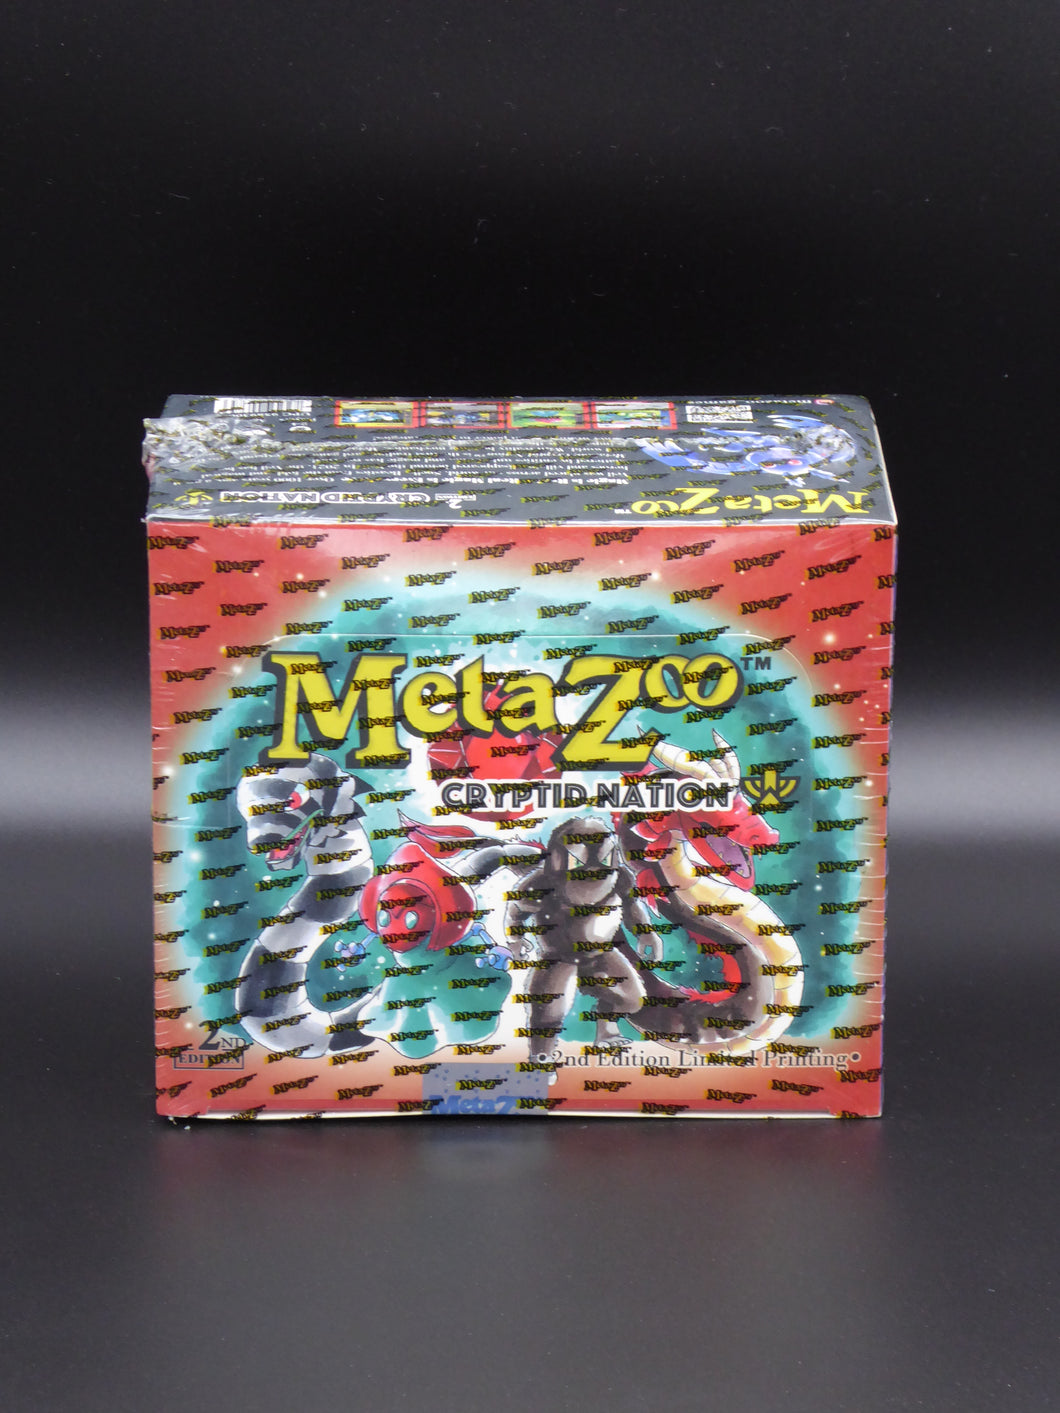 Metazoo Display Booster Box Cryptid Nation 2st Edition